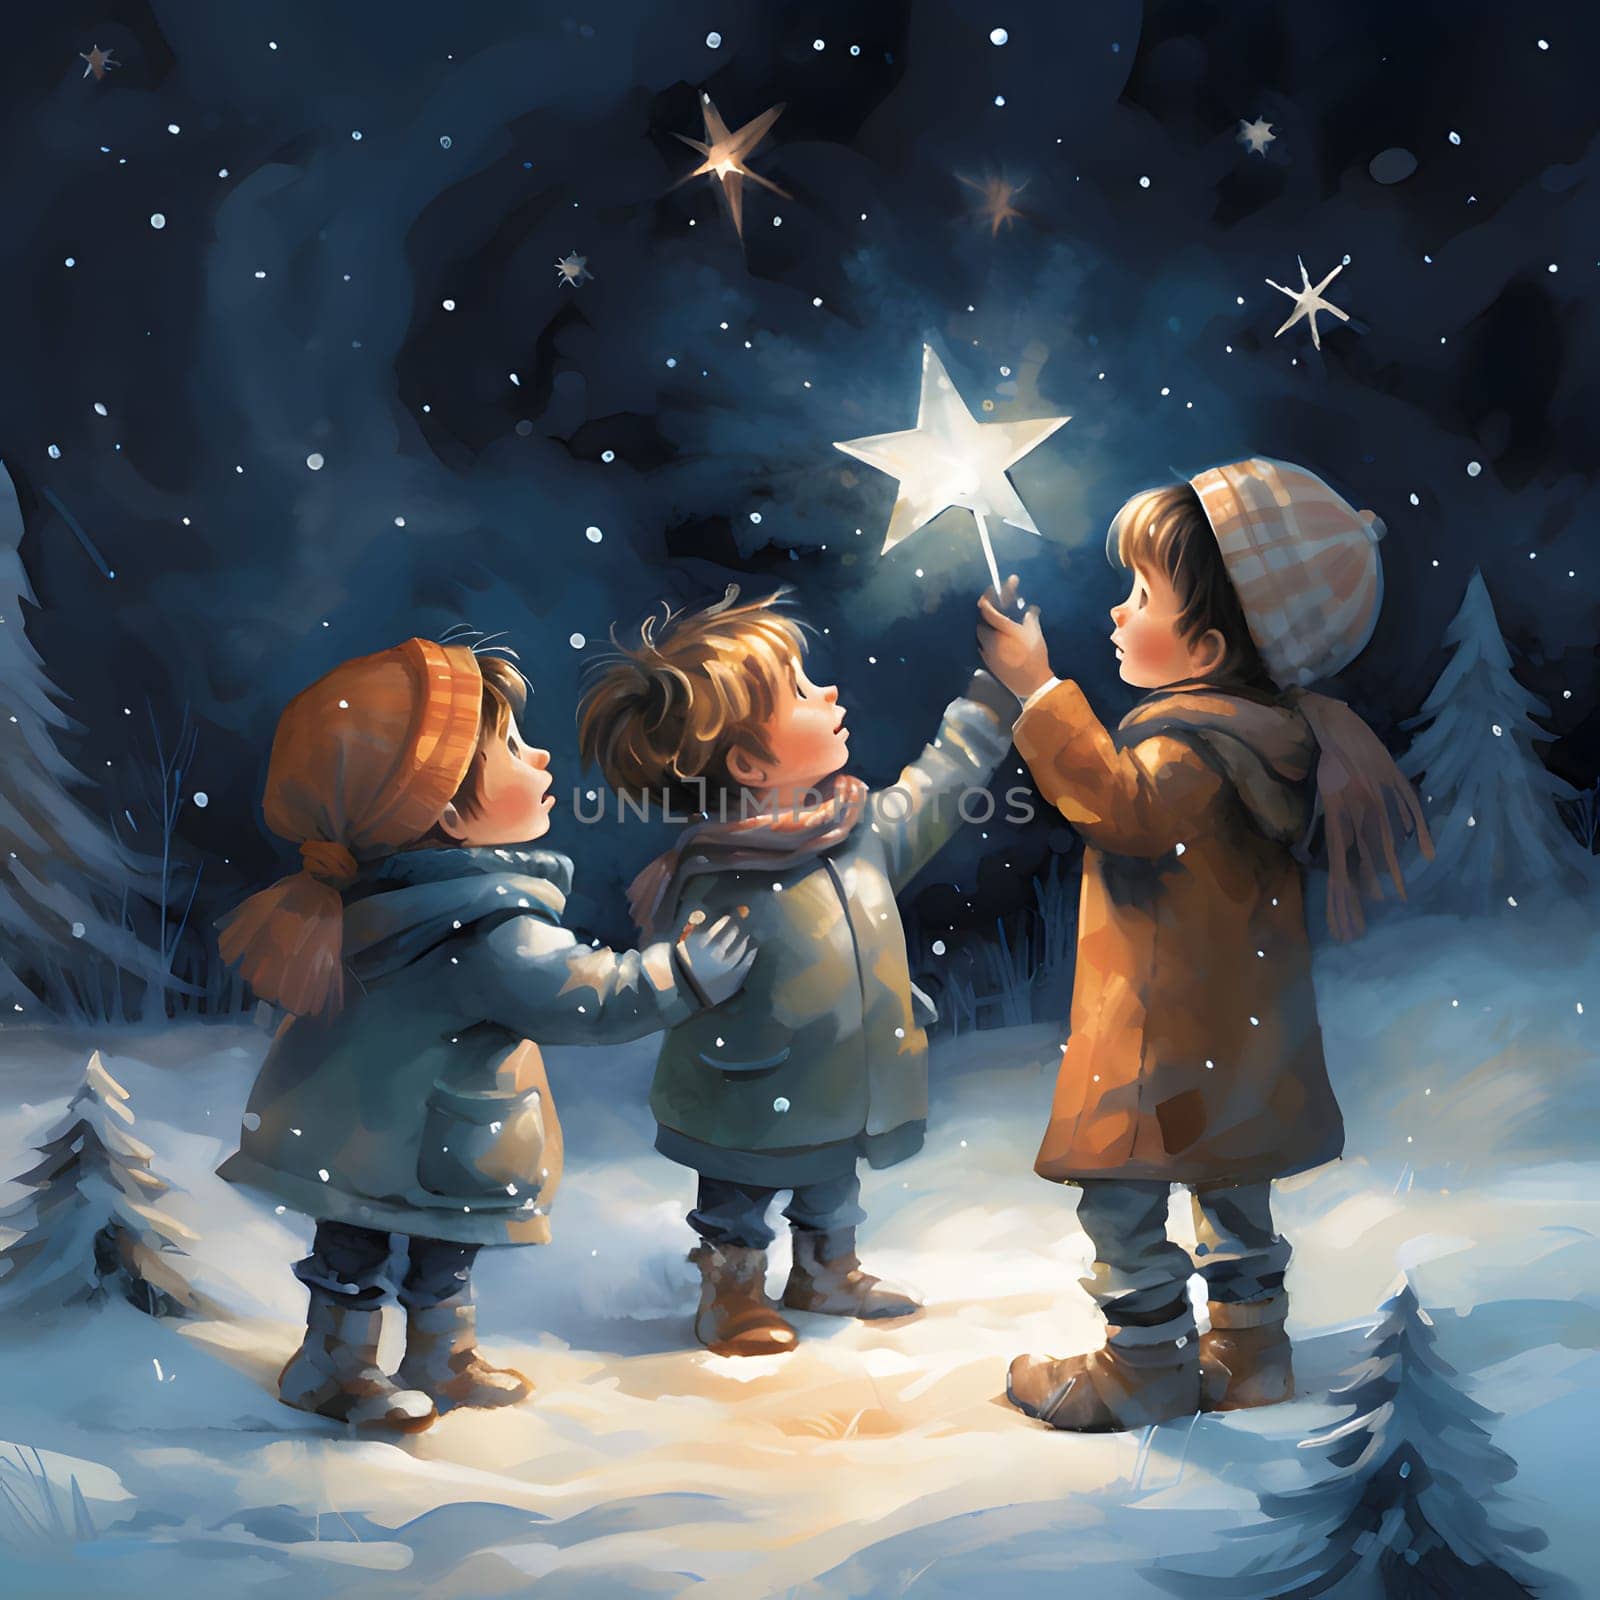 Illustration of three children in a winter landscape at night looking at the stars. The Christmas star as a symbol of the birth of the savior. by ThemesS